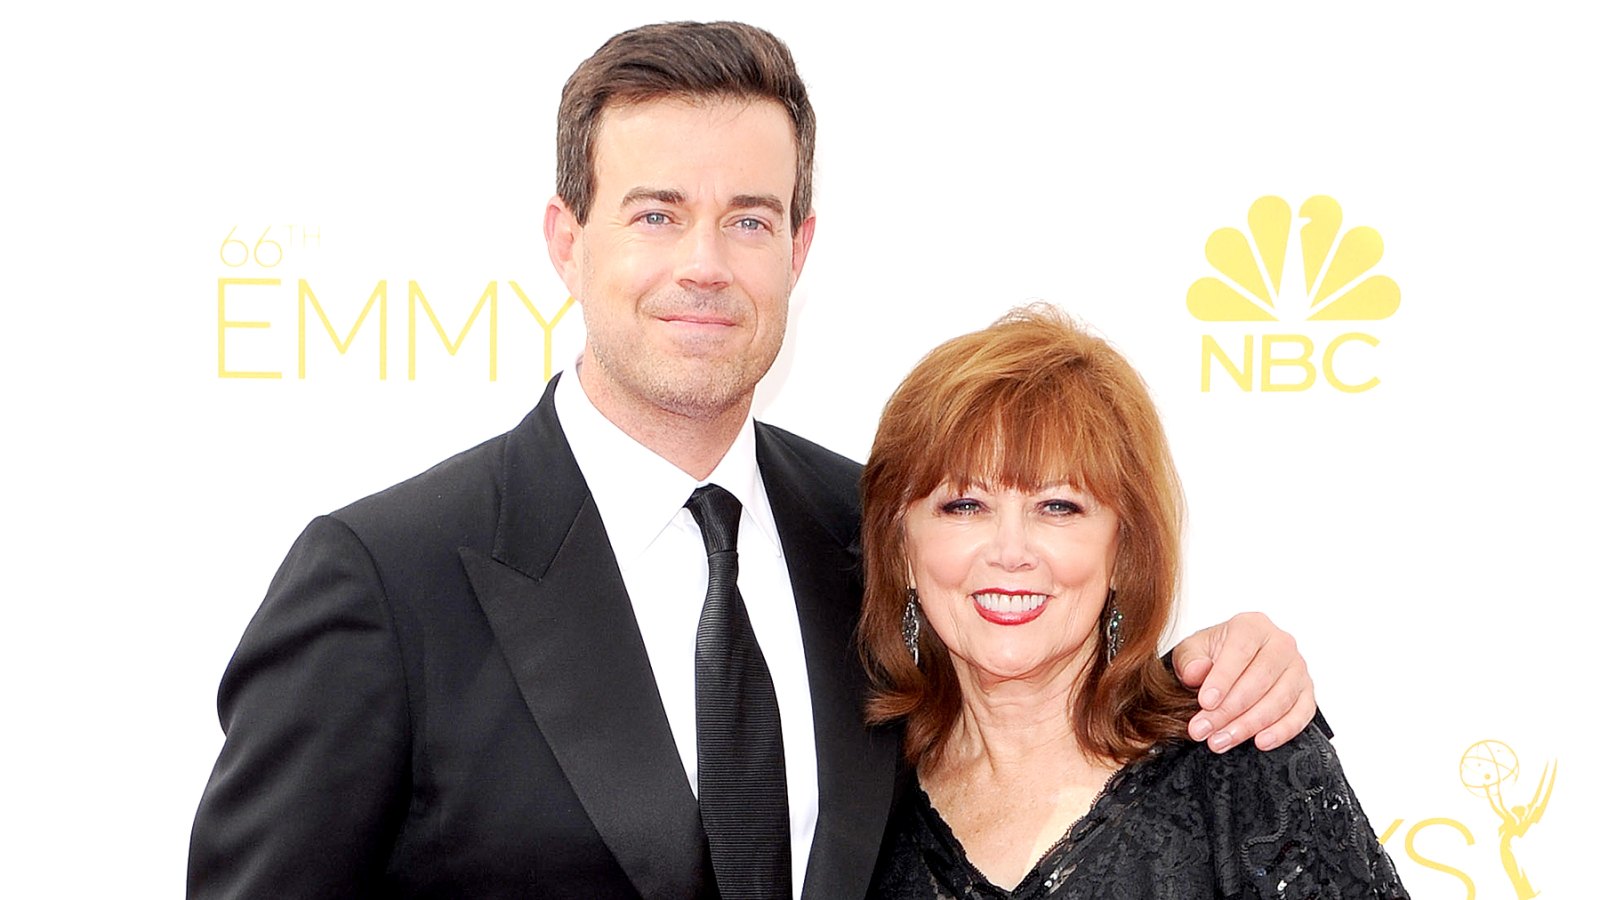 Carson Daly and Pattie Daly Caruso arrive at the 66th Annual Primetime Emmy Awards at Nokia Theatre L.A. Live on August 25, 2014 in Los Angeles, California.